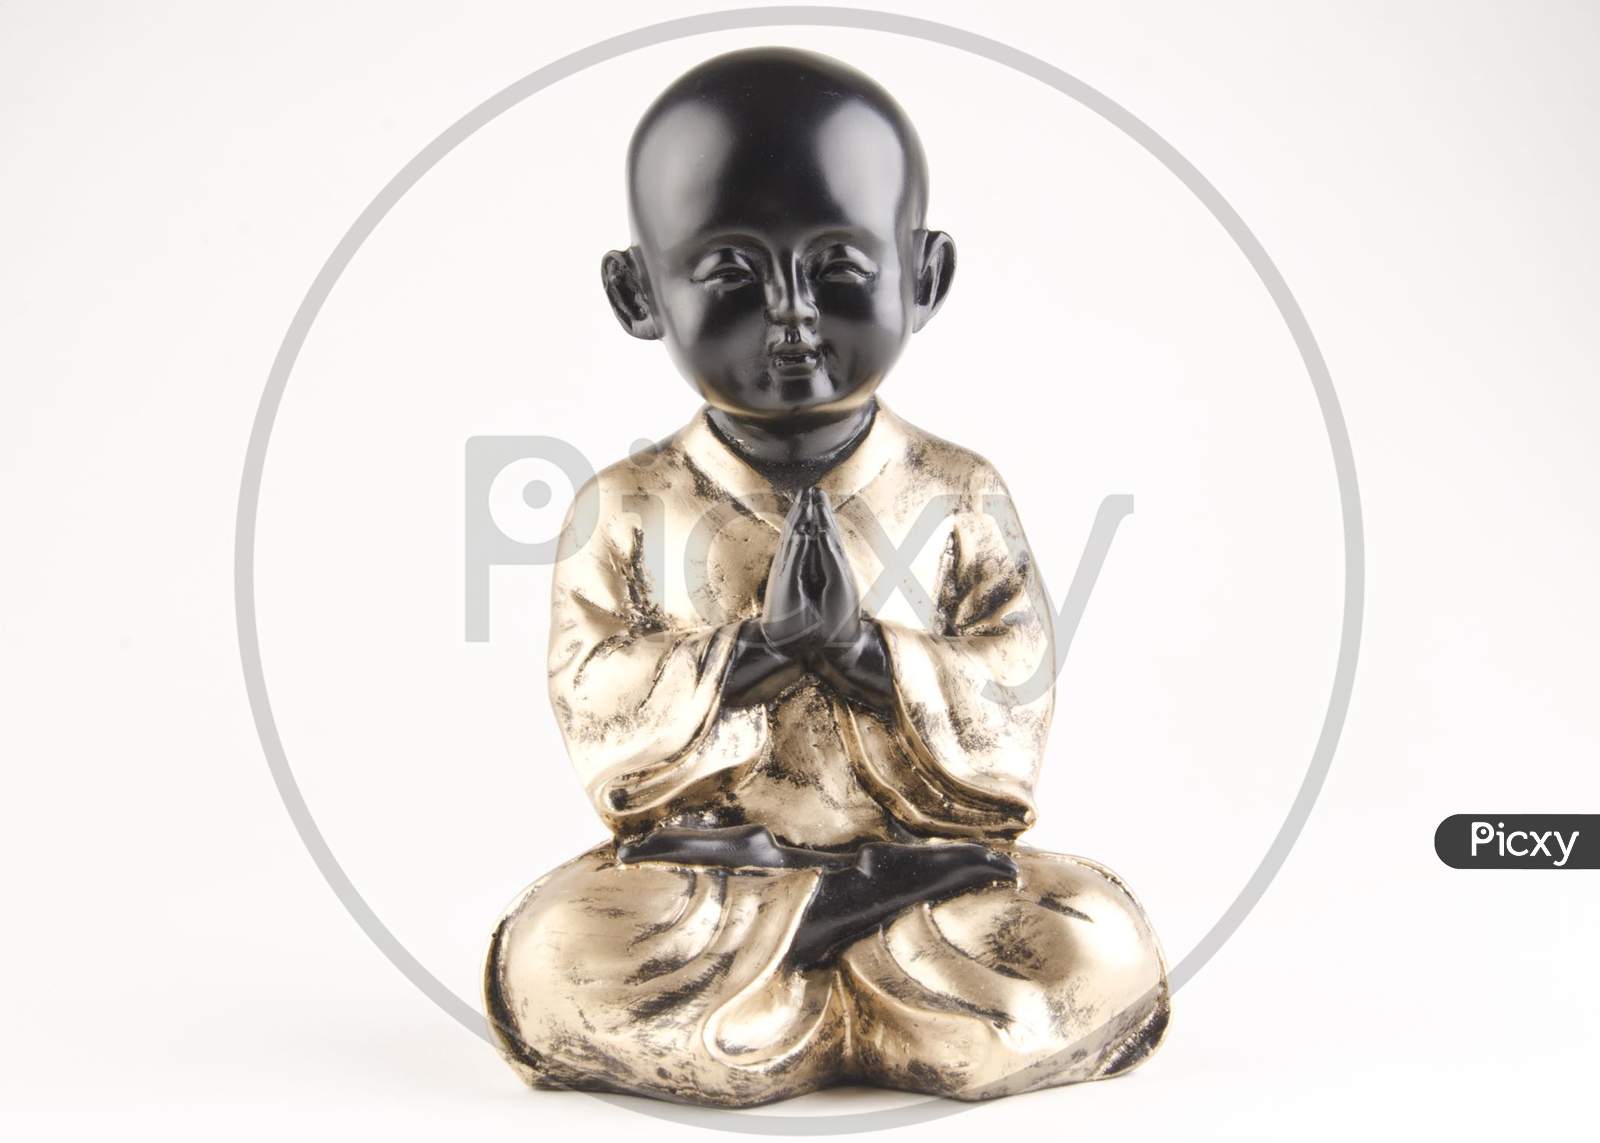 Chinese Boy Statue With Namaste Gesture Over An Isolated White Background